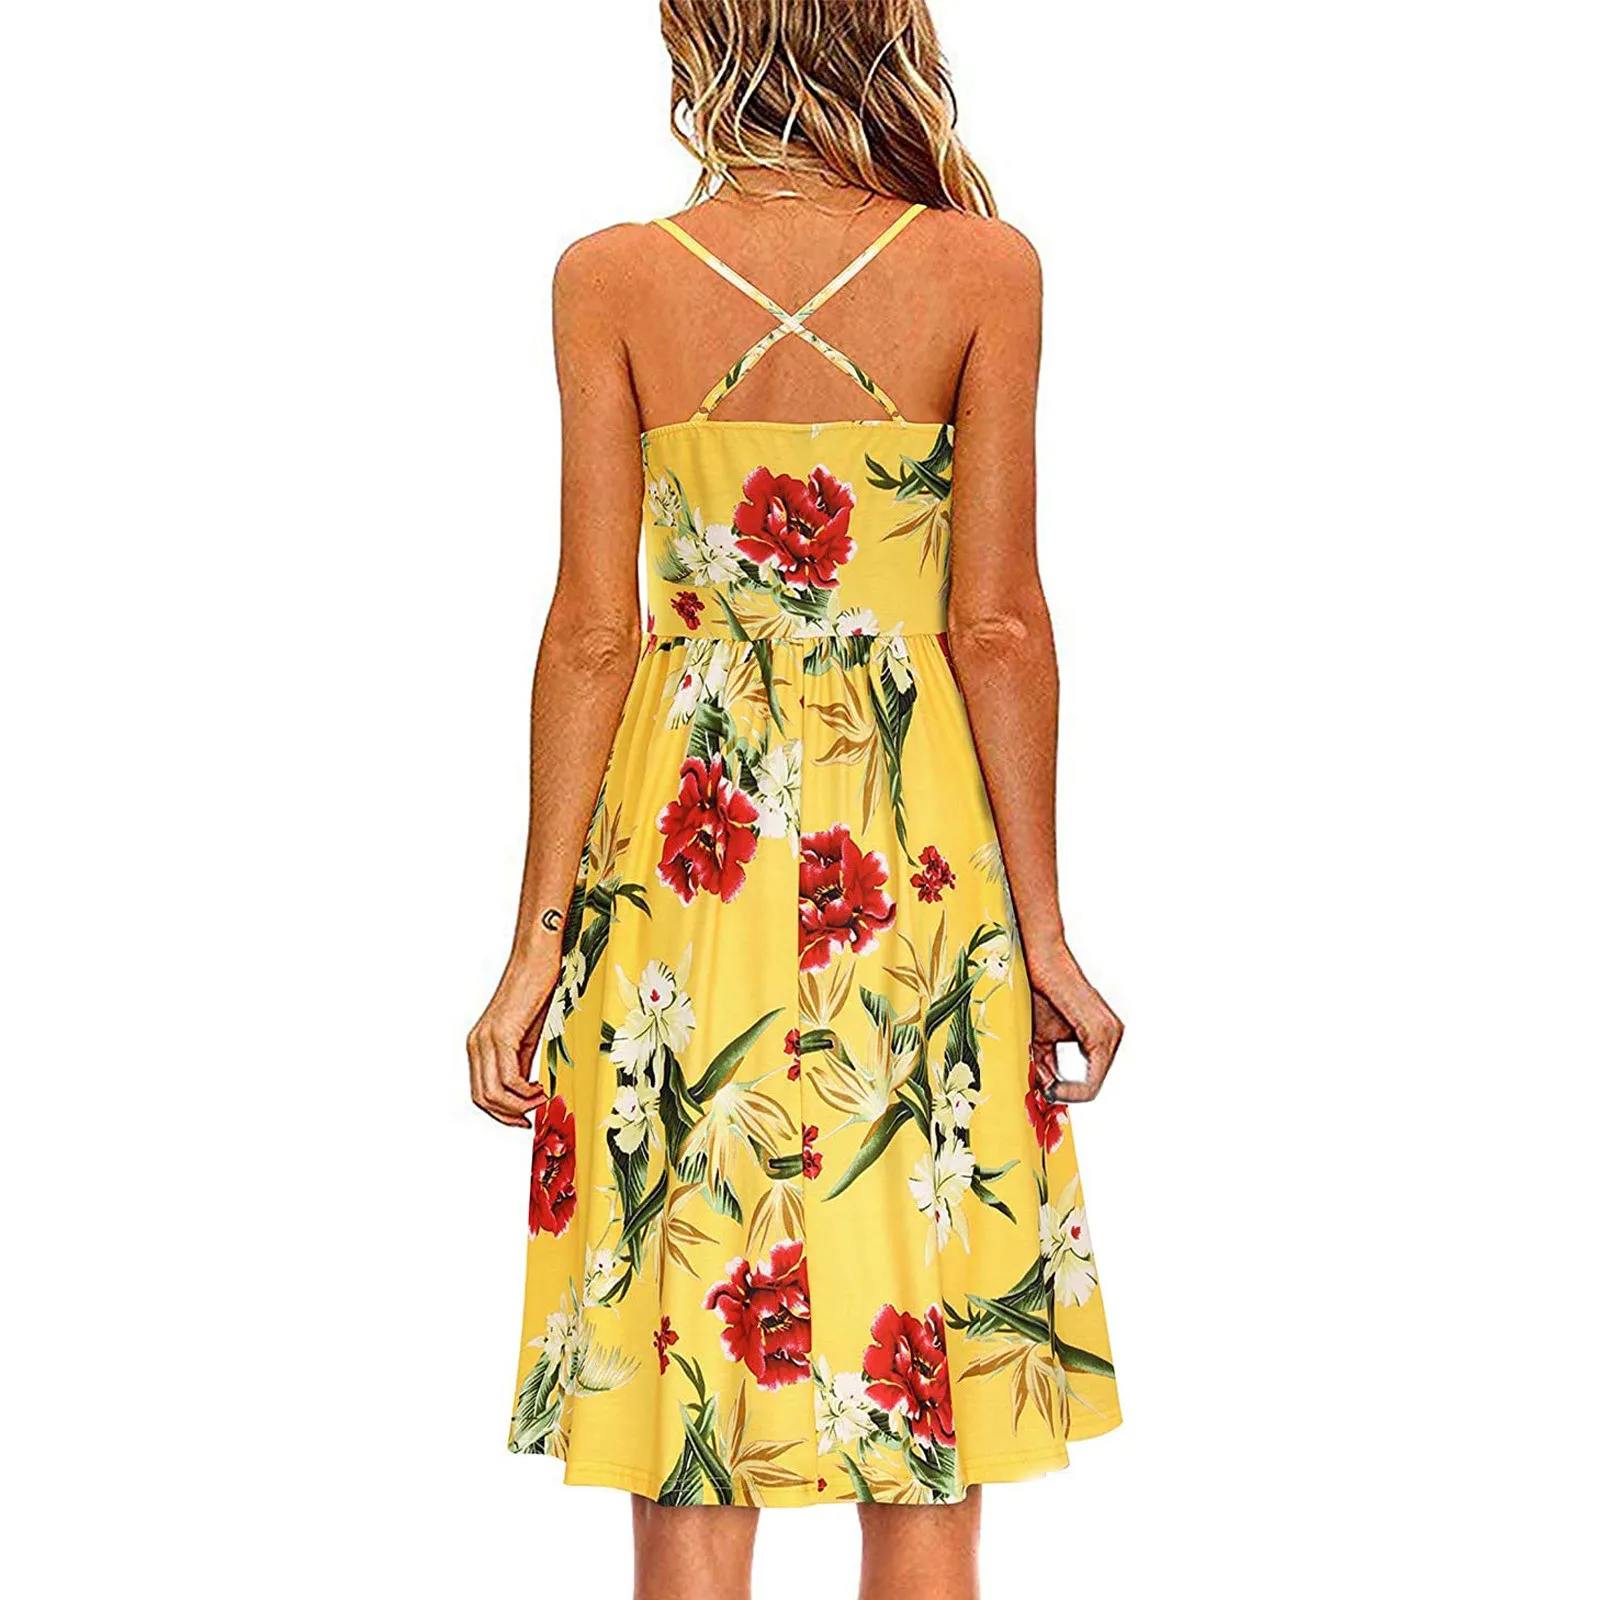 Summer Sexy Strapless Floral Print Dress Women 2021 Fashion Sleeveless Casual Knee-Length Sundress Vintage Backless Dresses 4